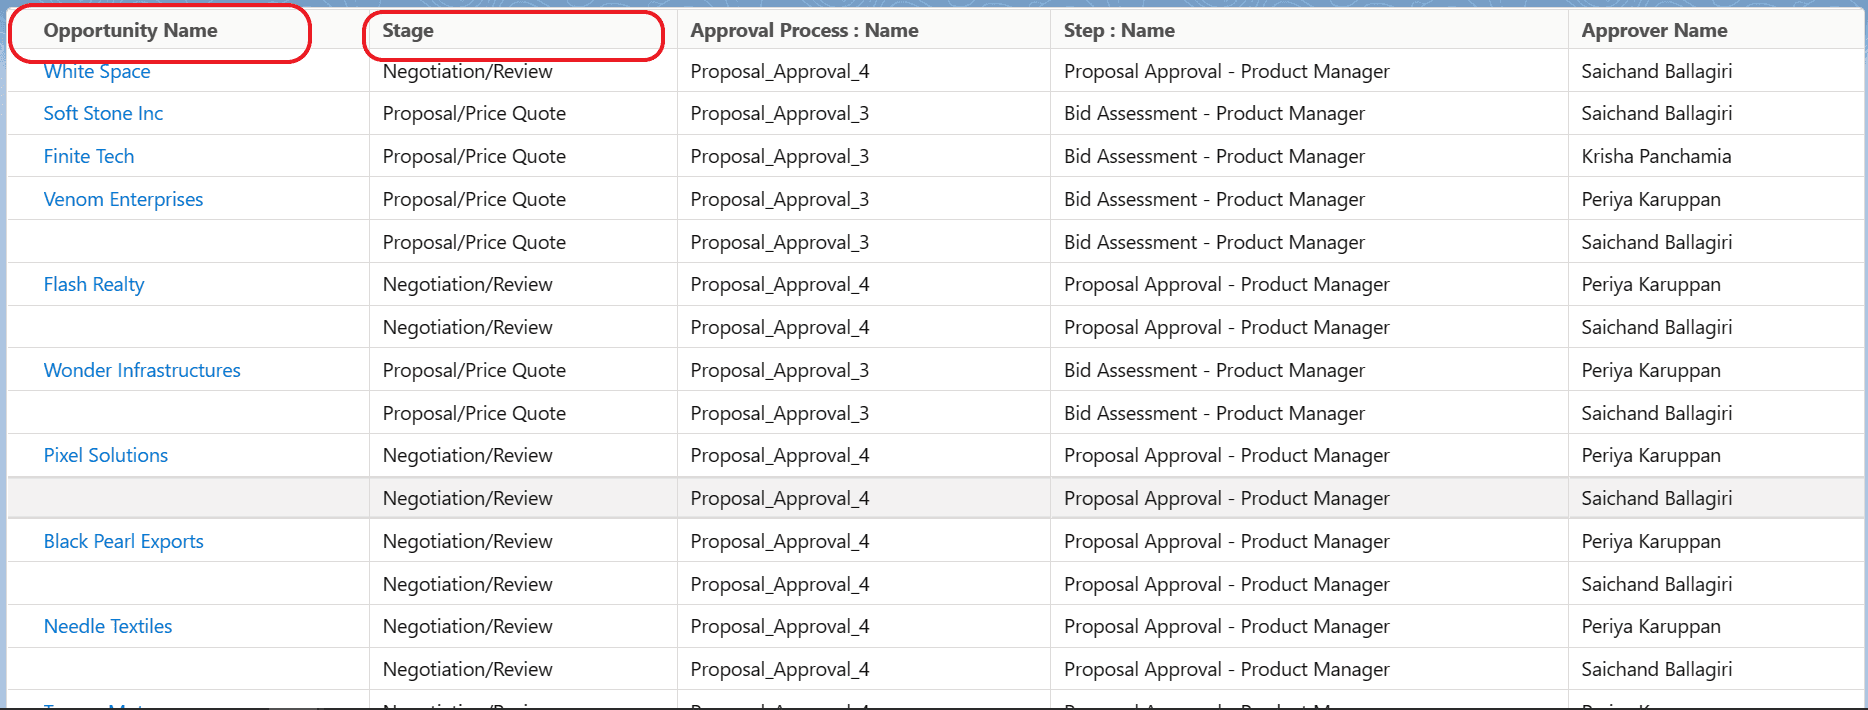 Display Opportunity Information with Pending Approval Steps